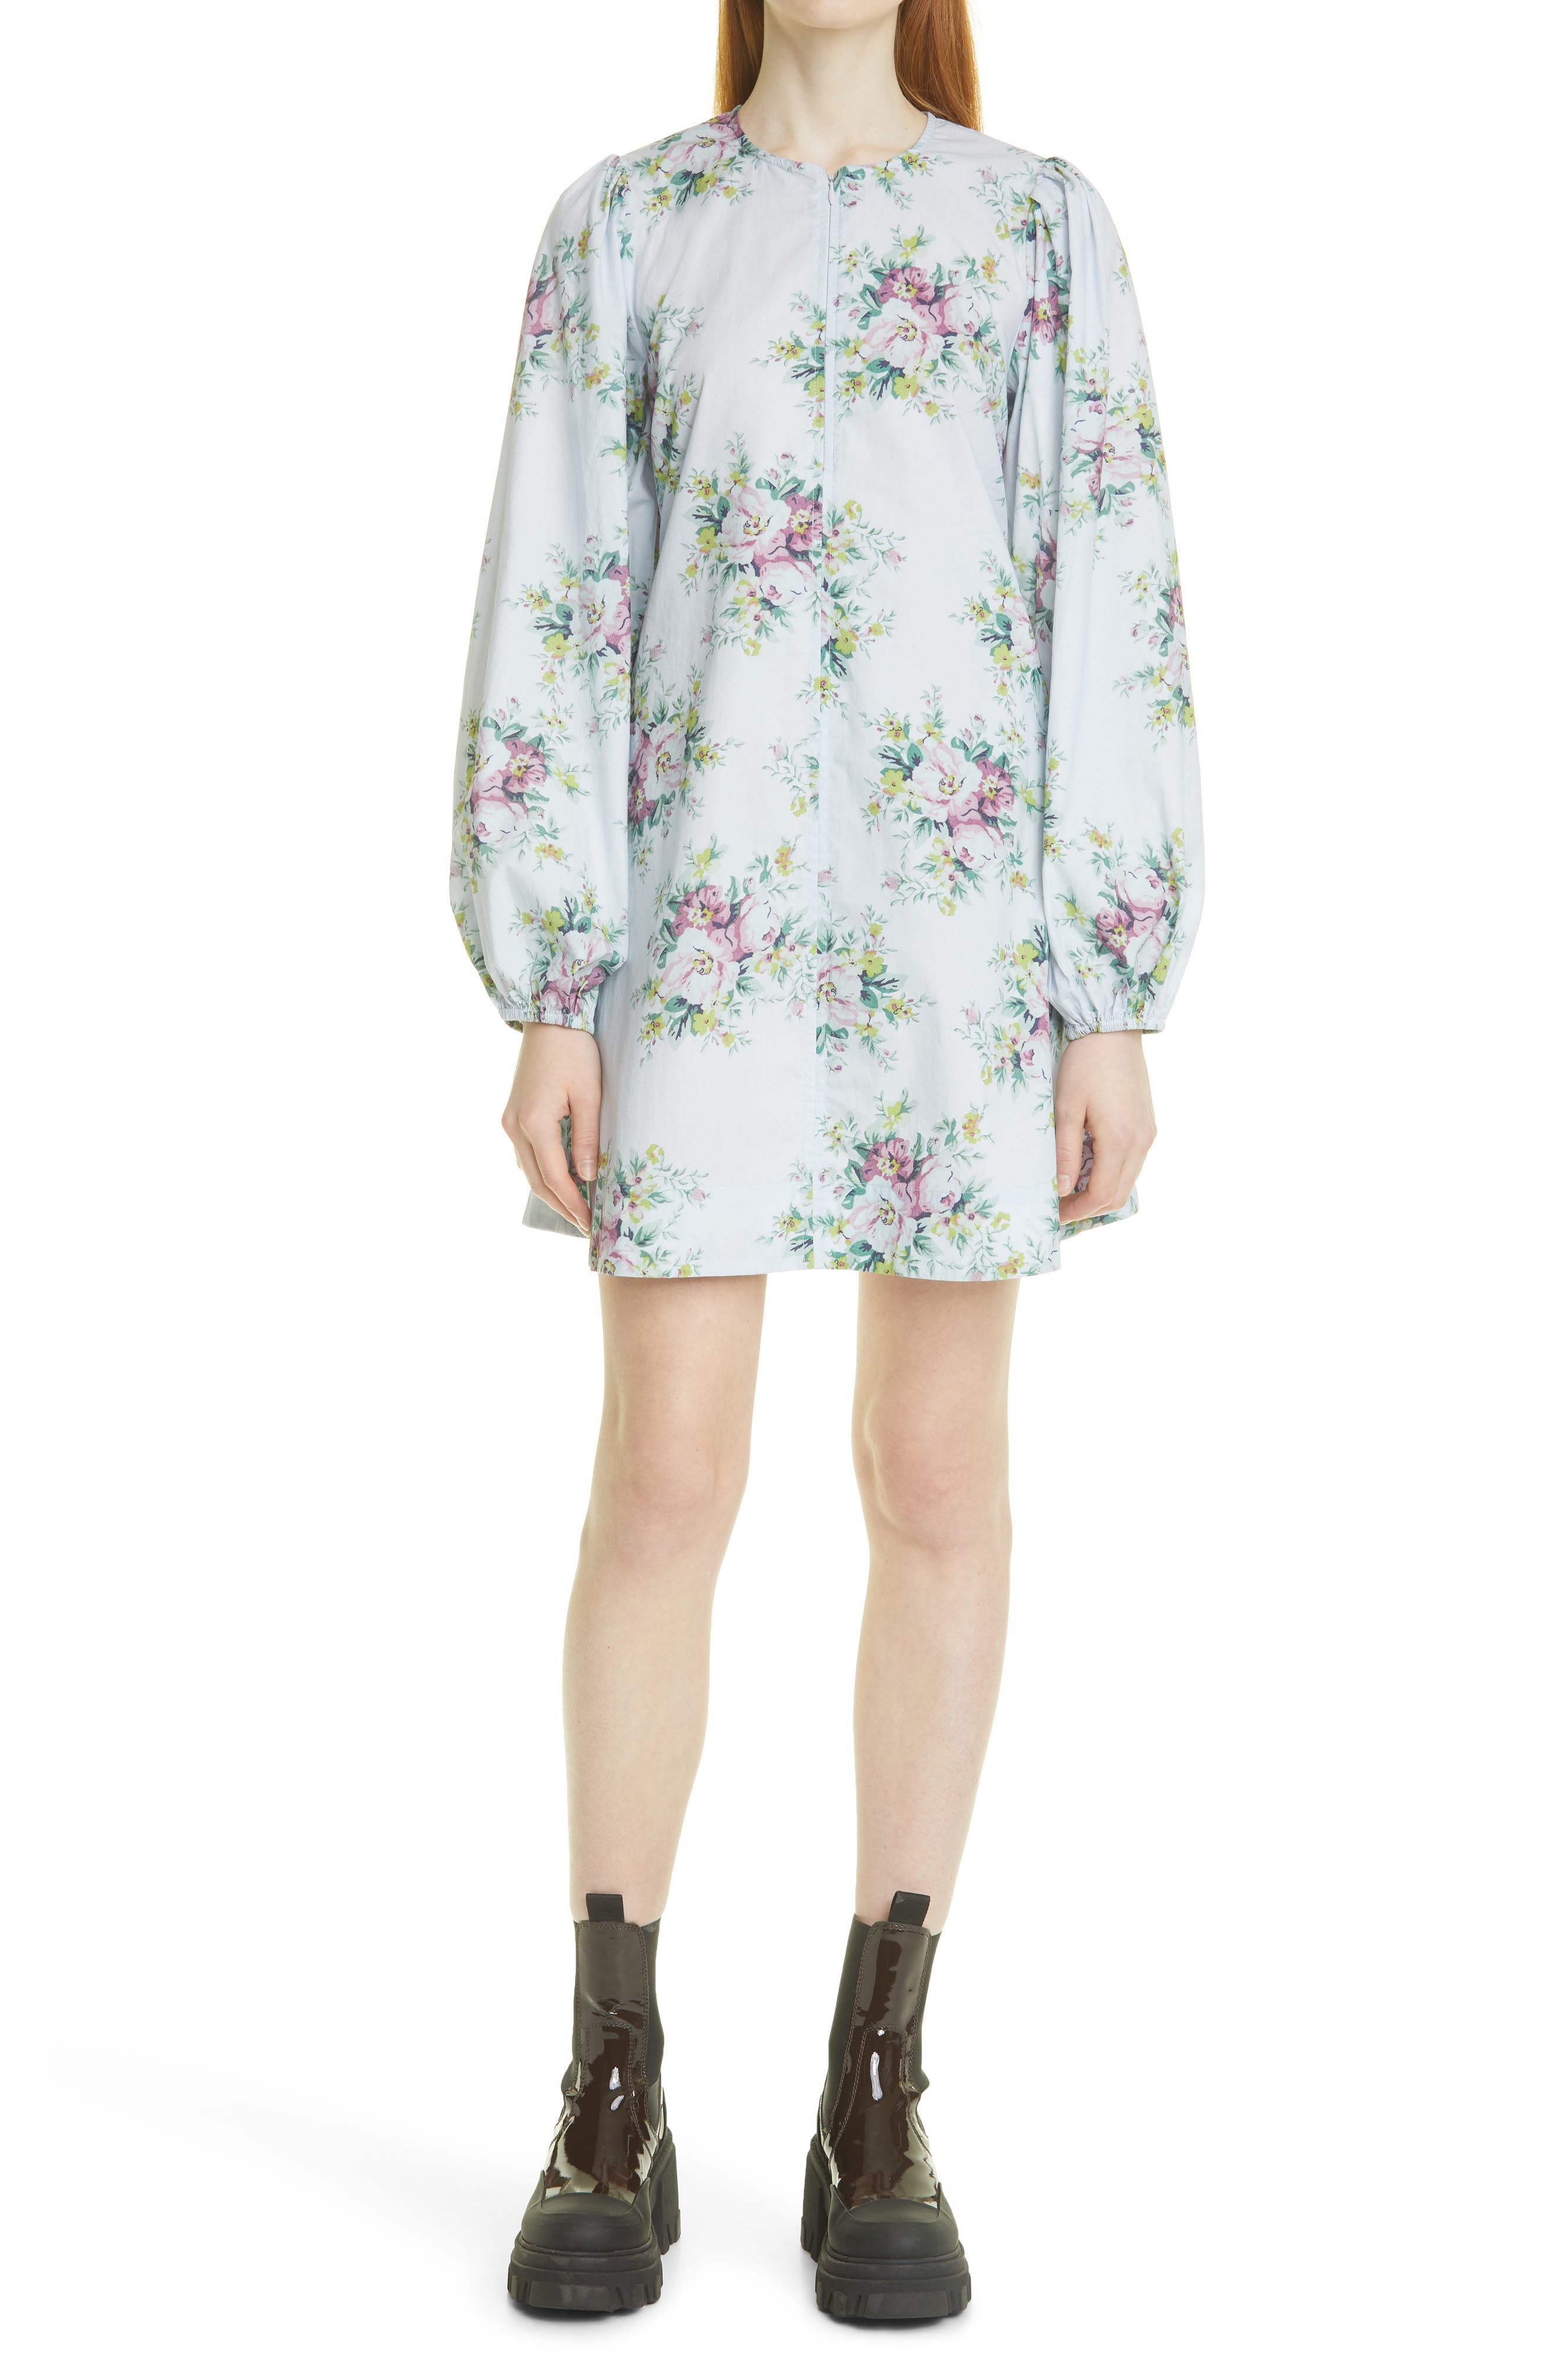 Ganni Floral Long Sleeve Organic Cotton Dress in Heather at Nordstrom, Size 2 Us